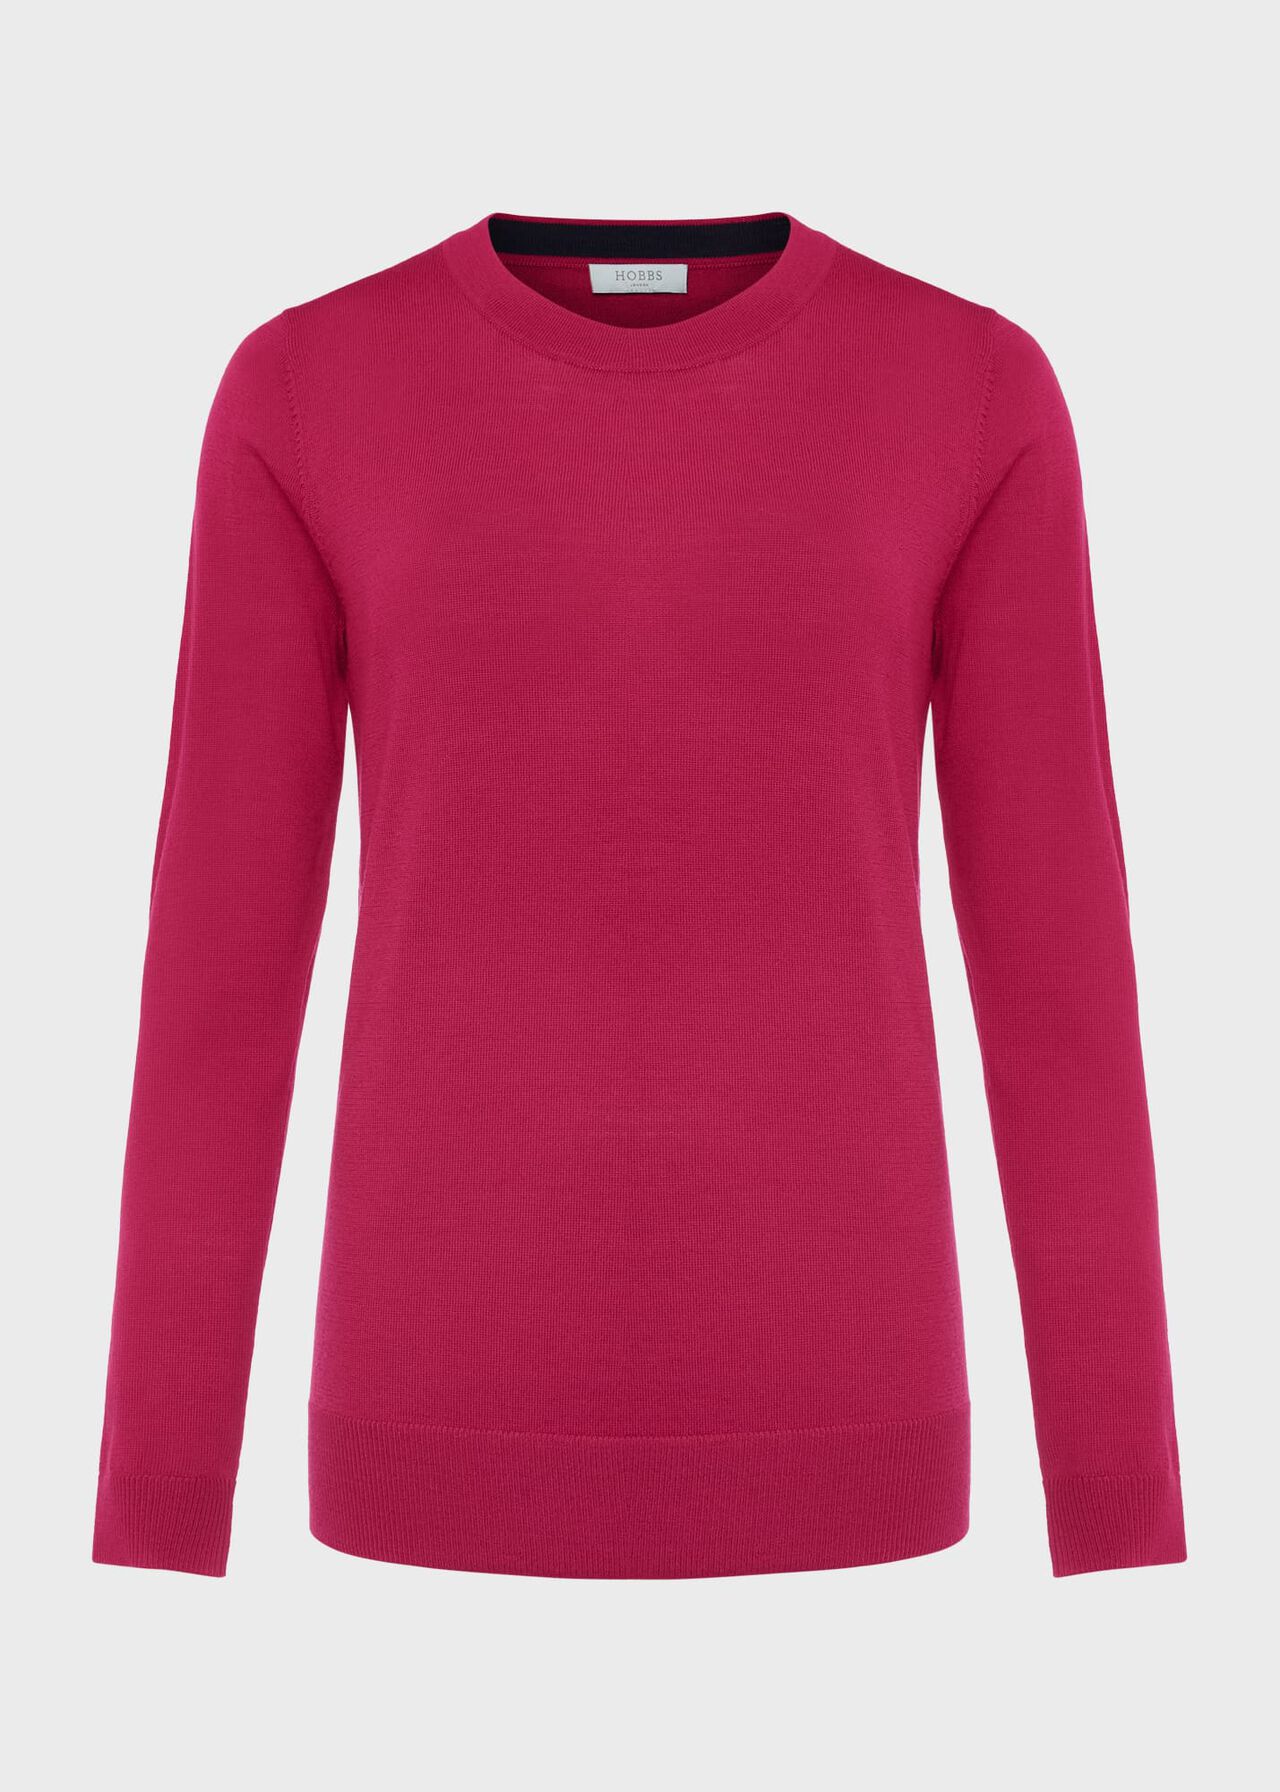 Penny Merino Wool Sweater, Rich Berry Red, hi-res